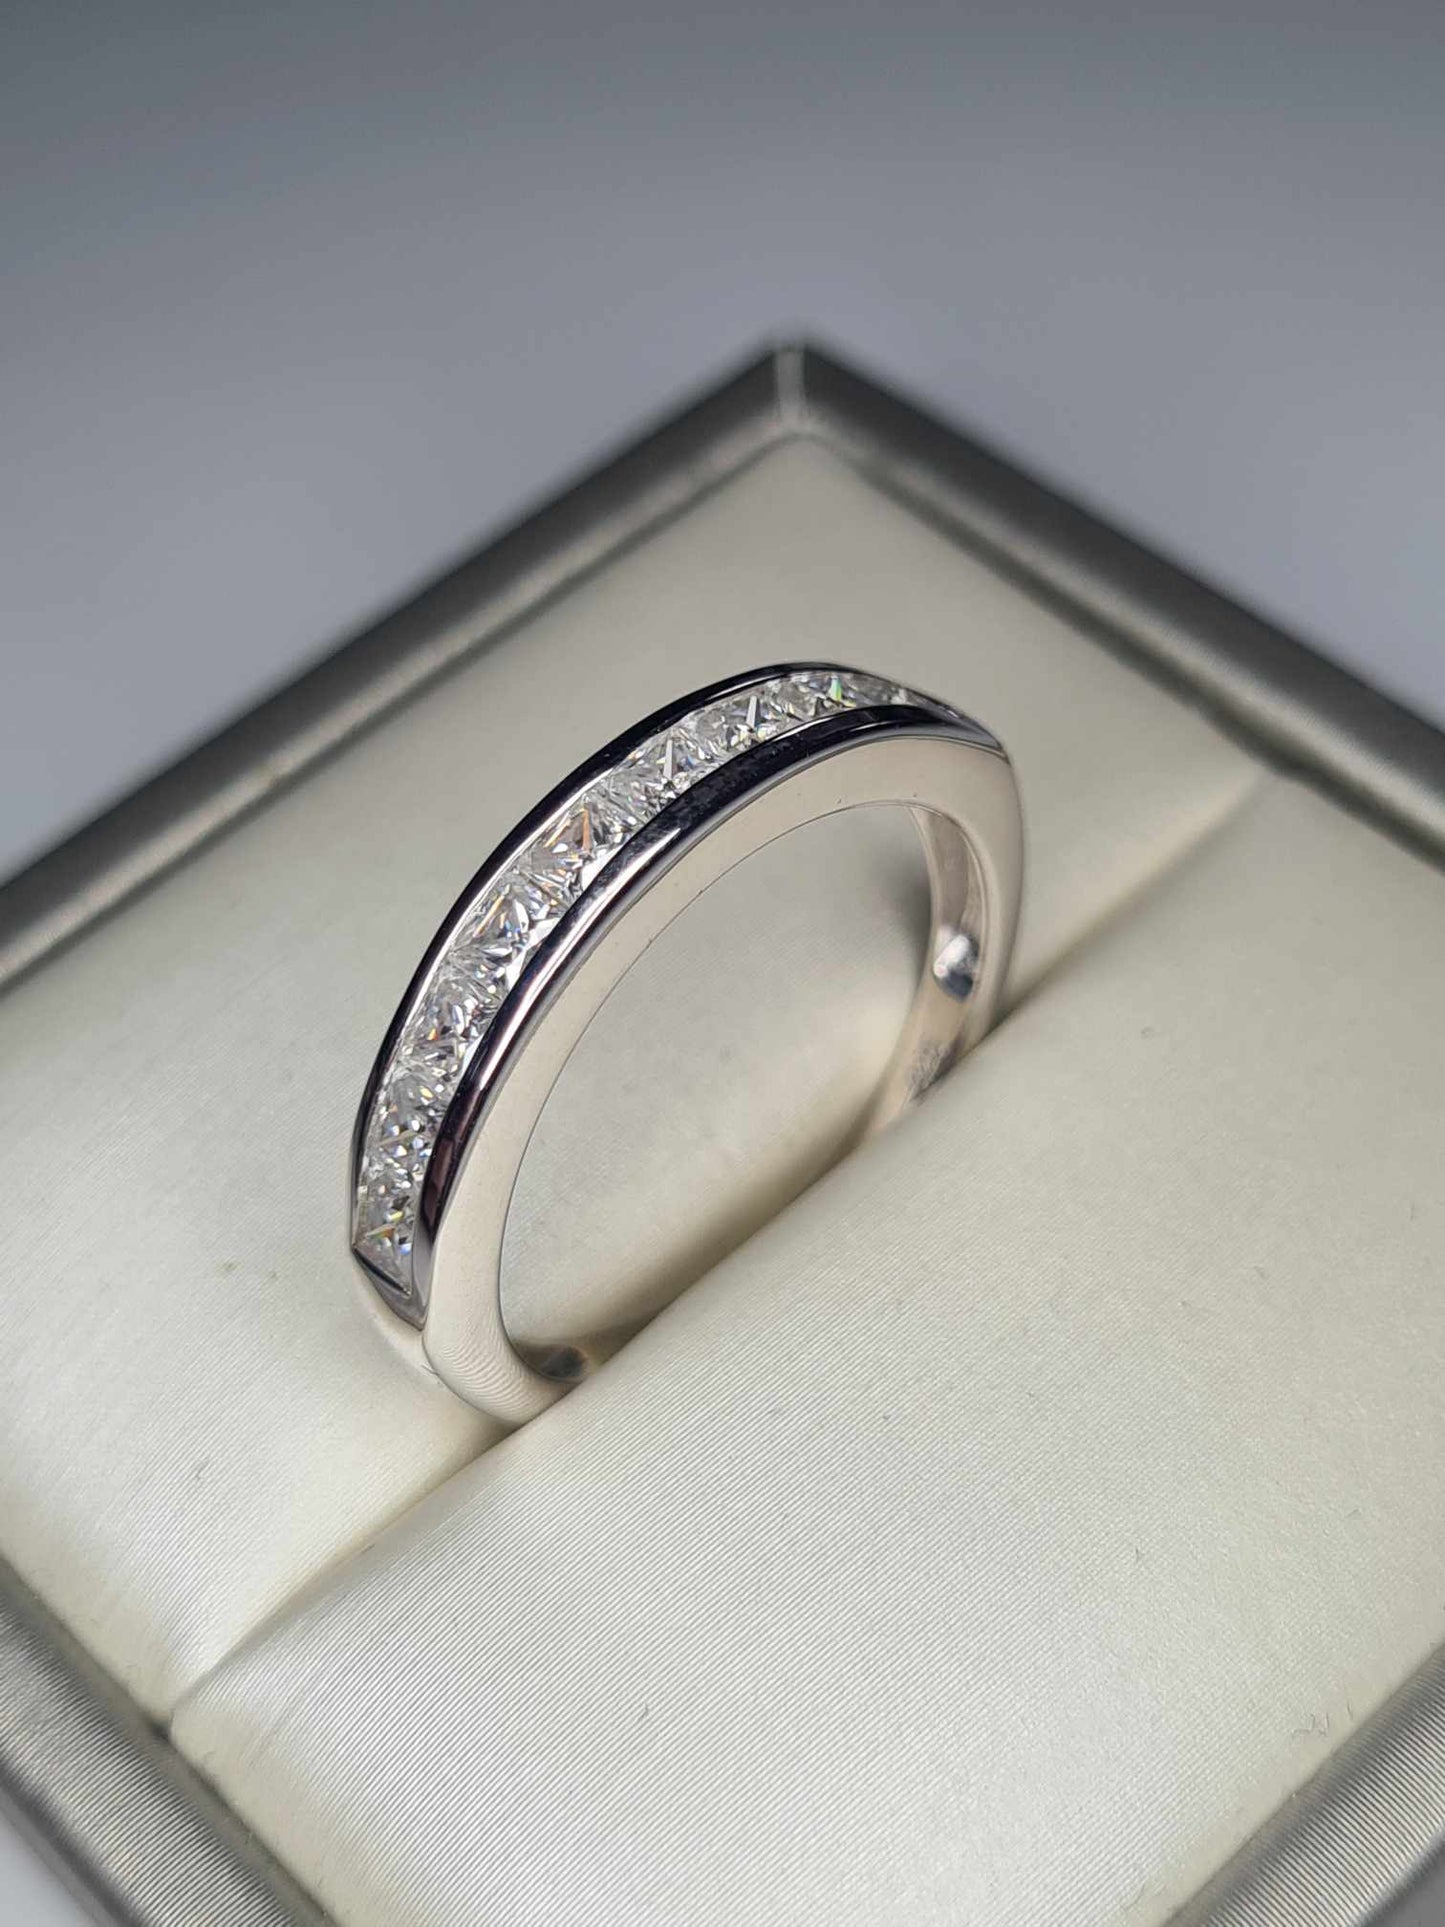 1.36 Ct Moissanite Half Eternity Band Ring in Platinum Overlay Sterling Silver SIZE V